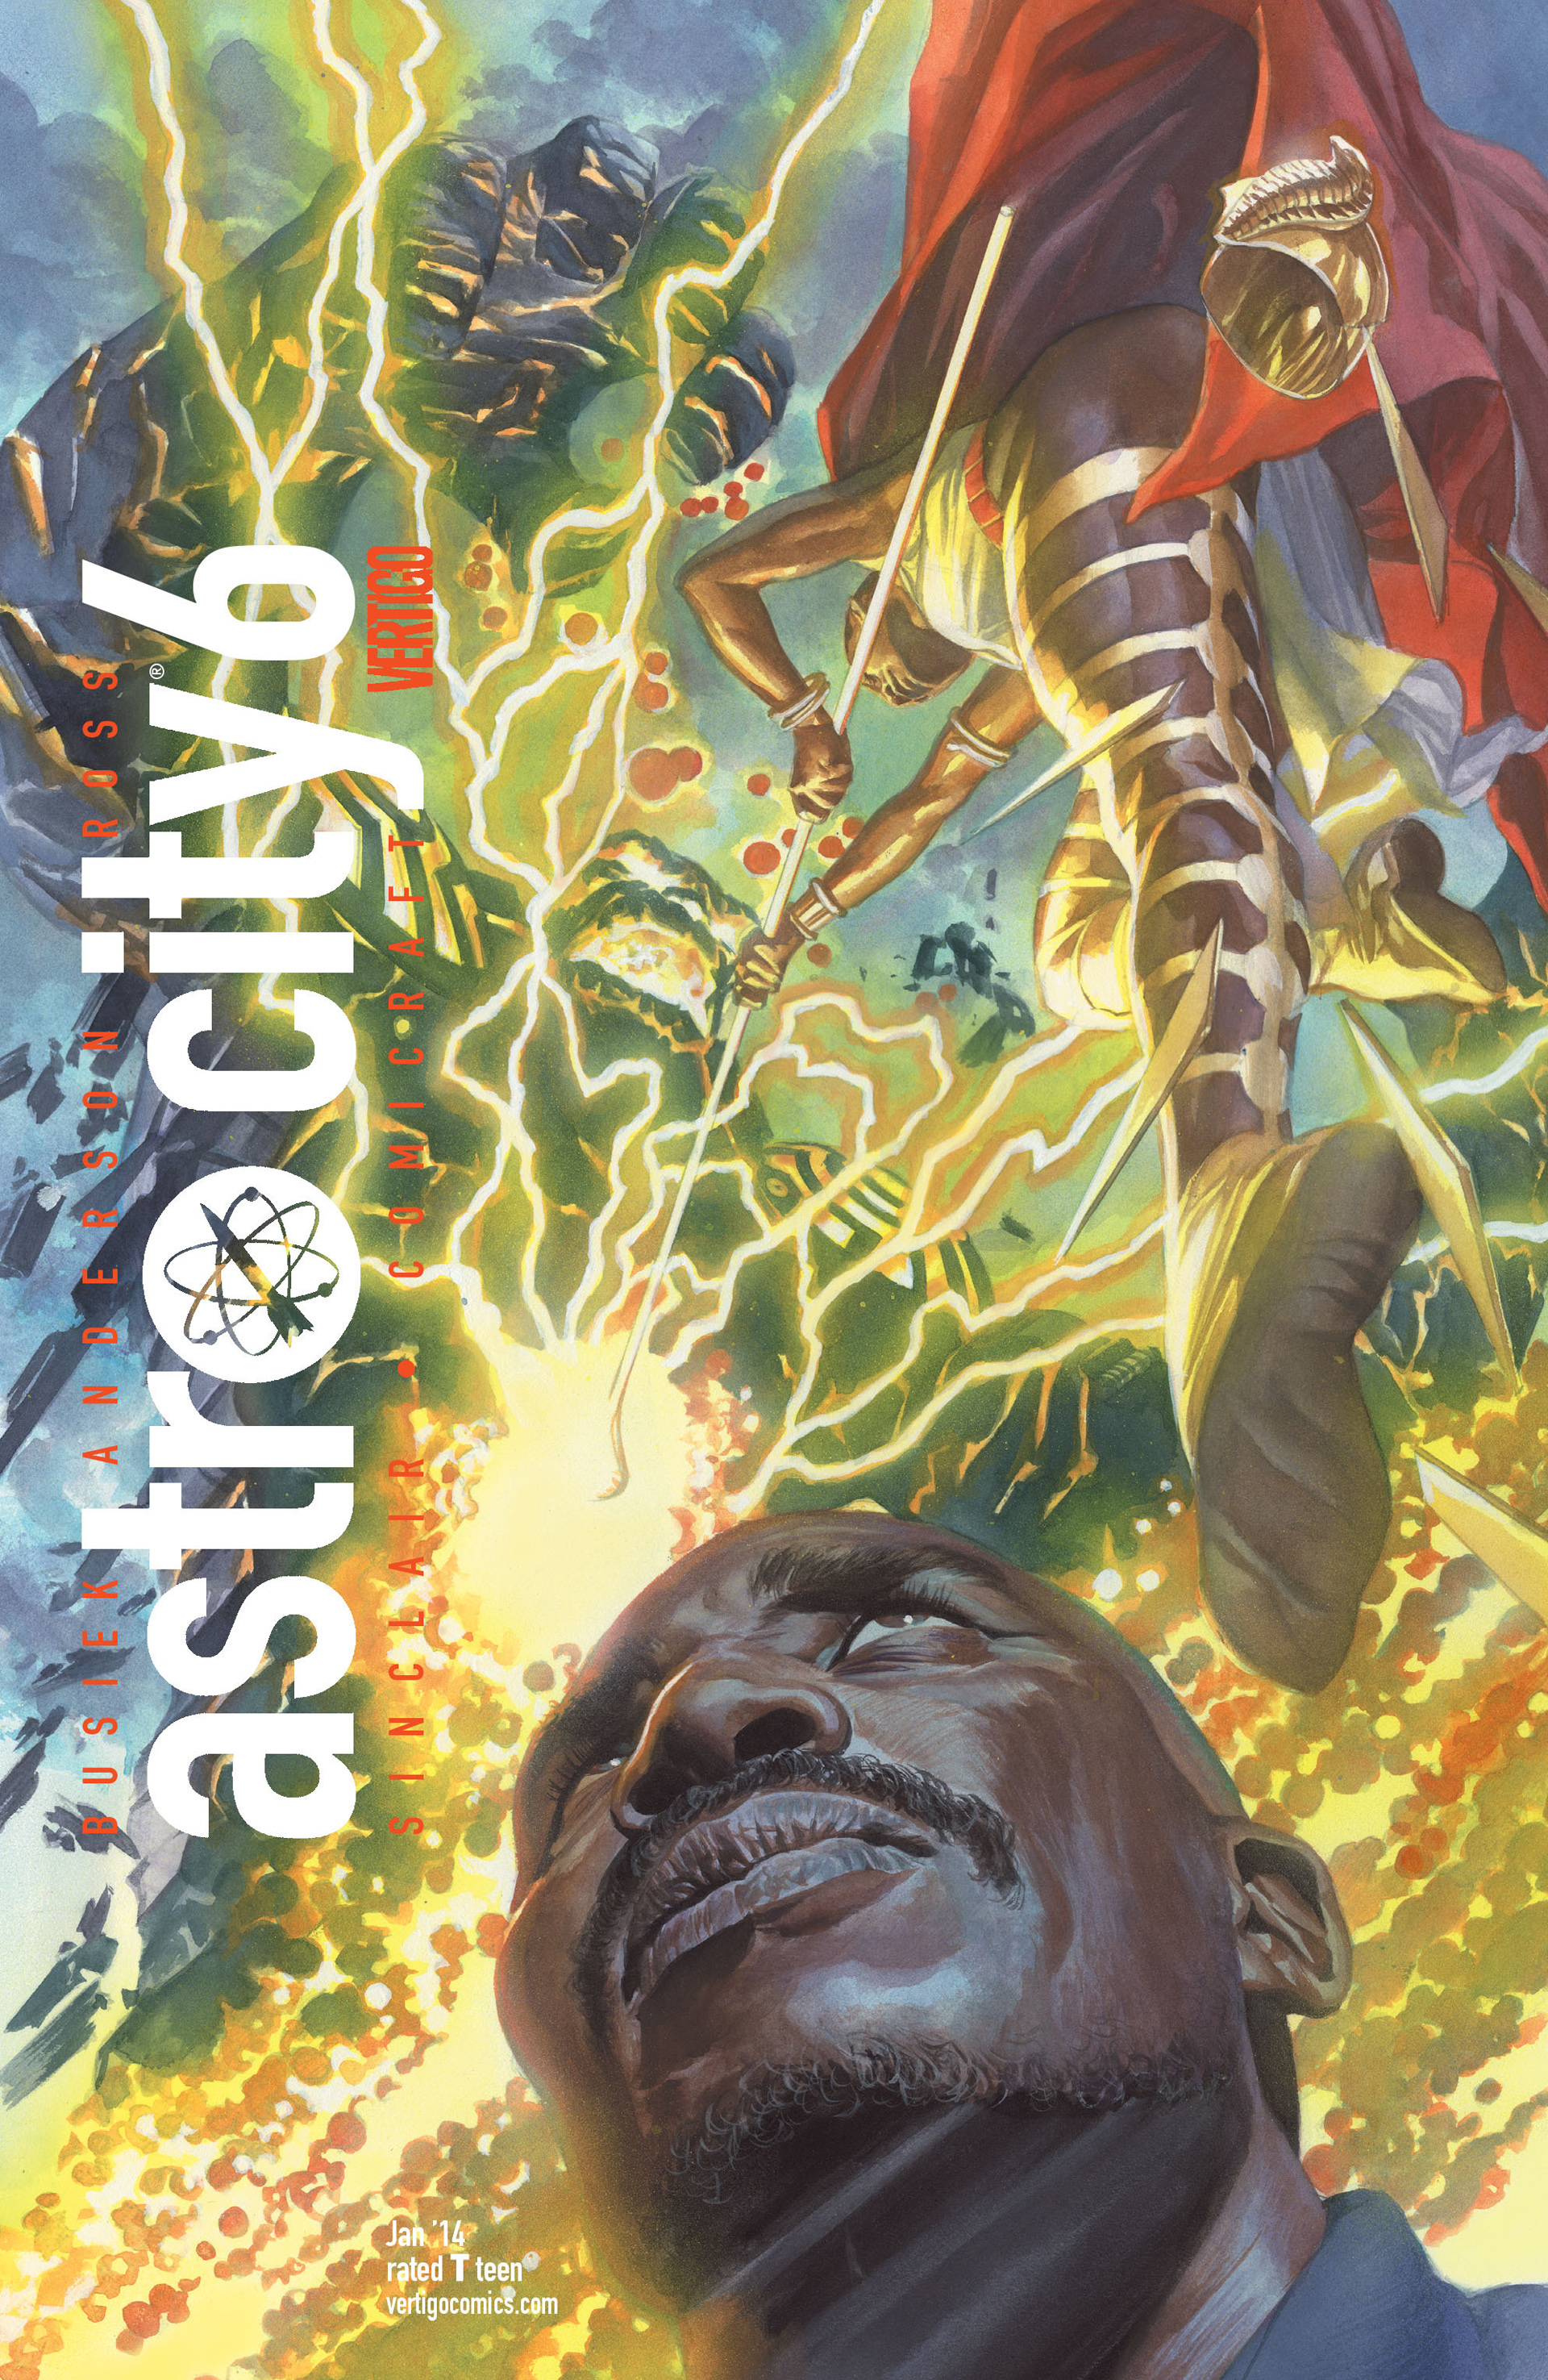 Astro City (2013-): Chapter 6 - Page 1